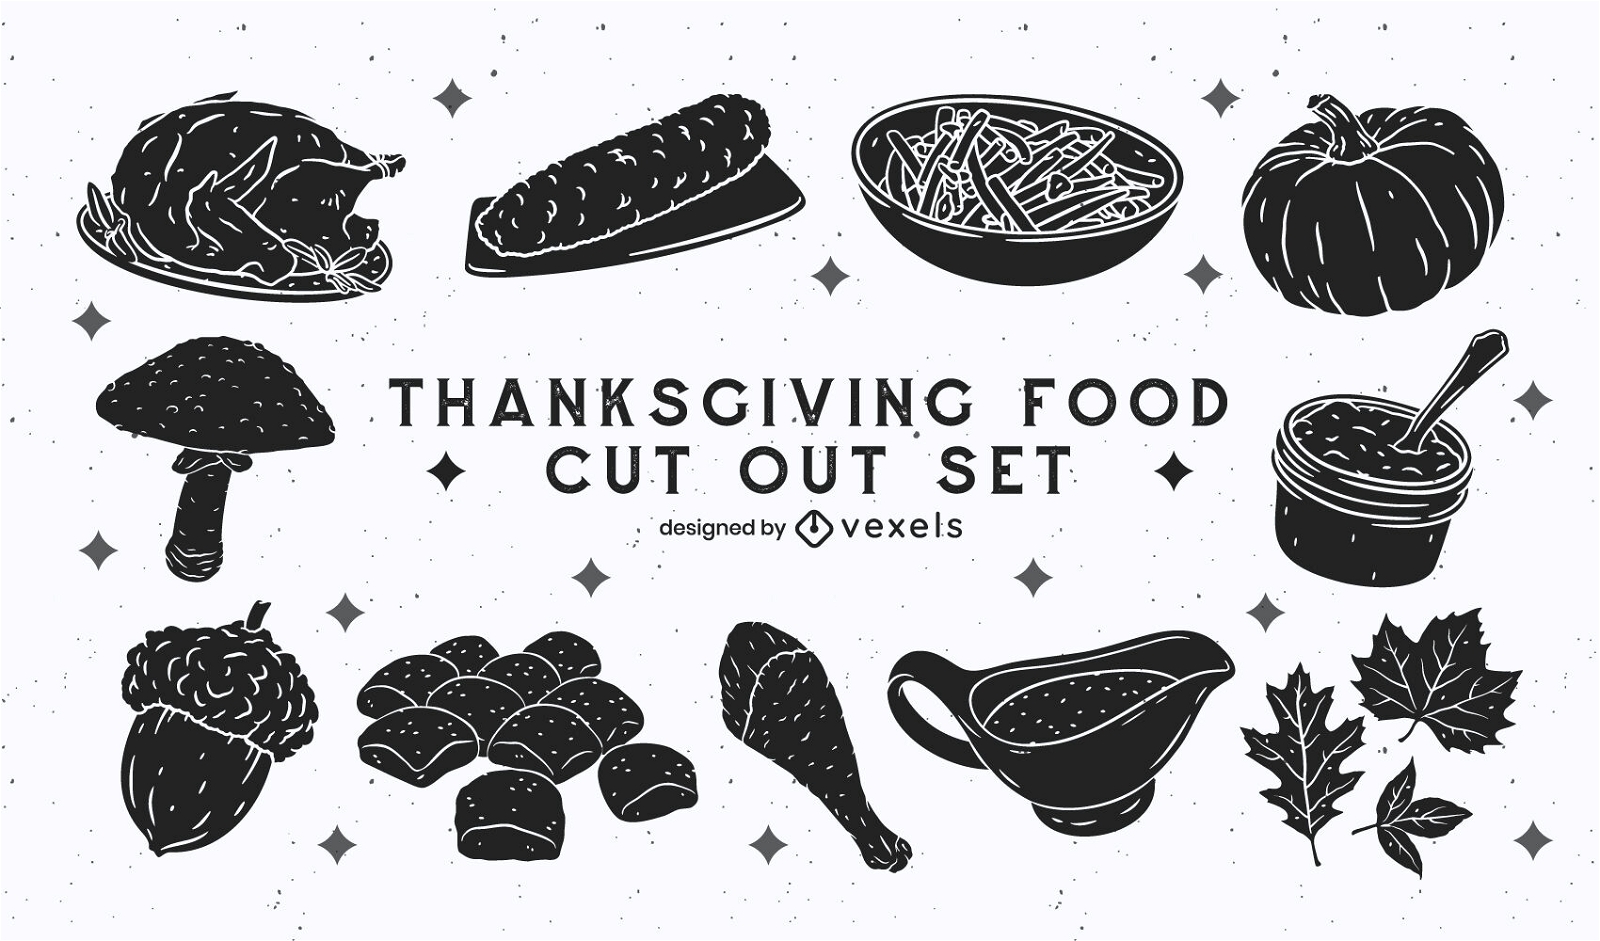 Thanksgiving holiday food cut out set